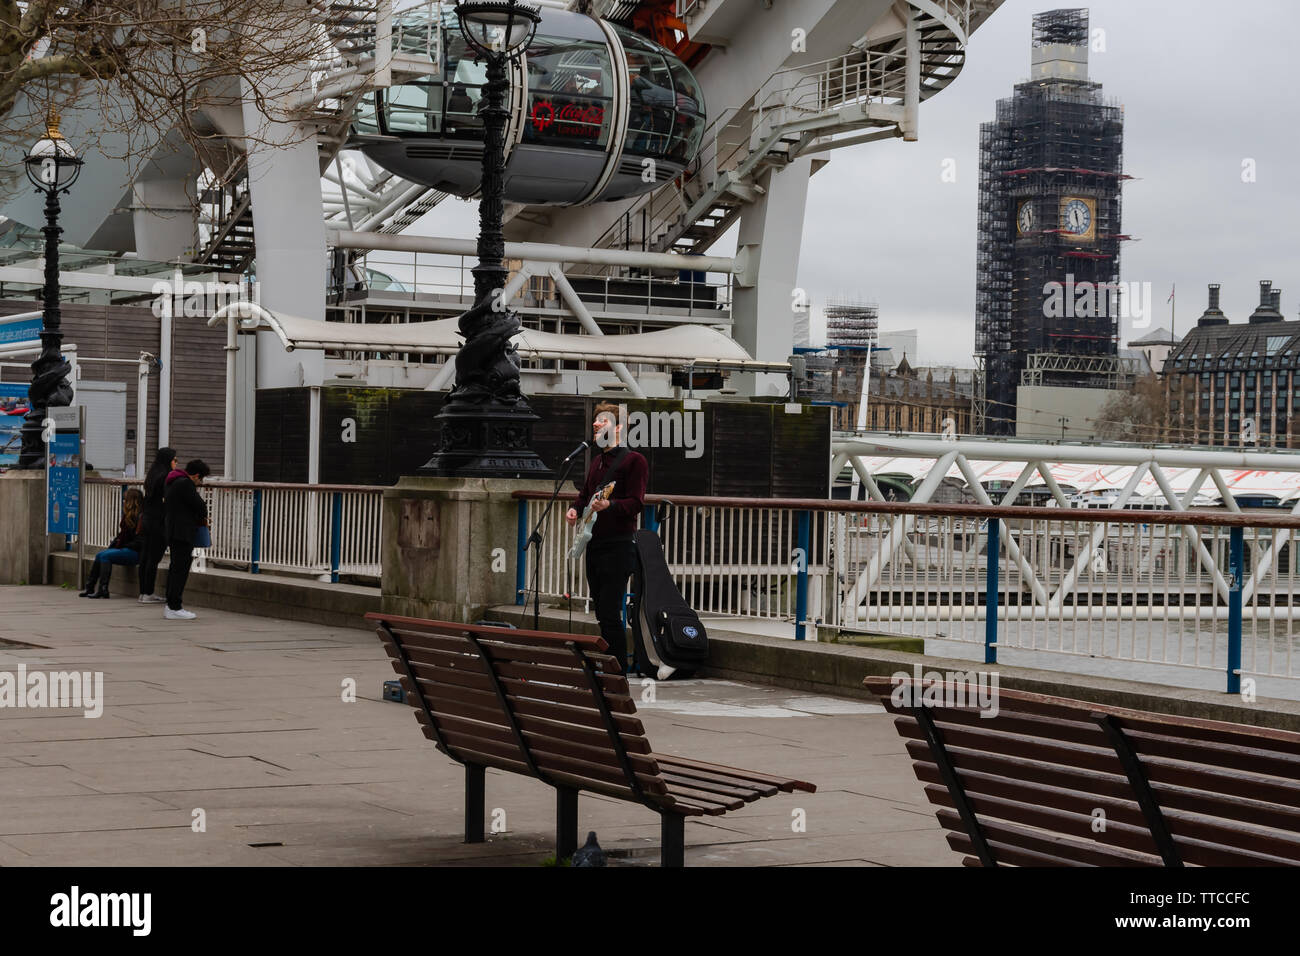 London - The Queen's Walk, South Bank - March 20, 2019 Stock Photo